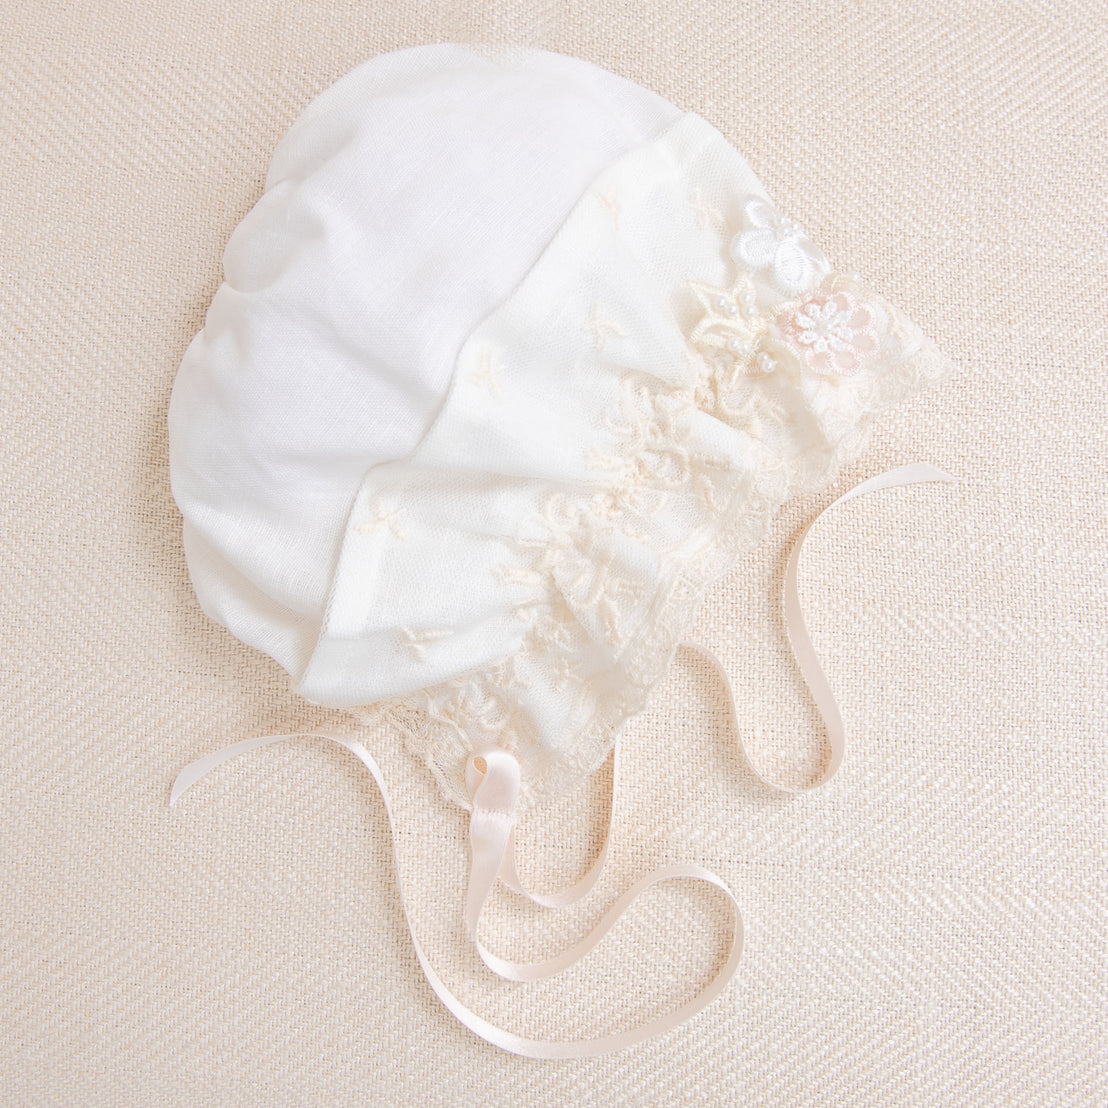 The Jessica Linen Bonnet, a delicate white bonnet with champagne lace detailing and thin ribbon ties, laid out on a textured cream background.